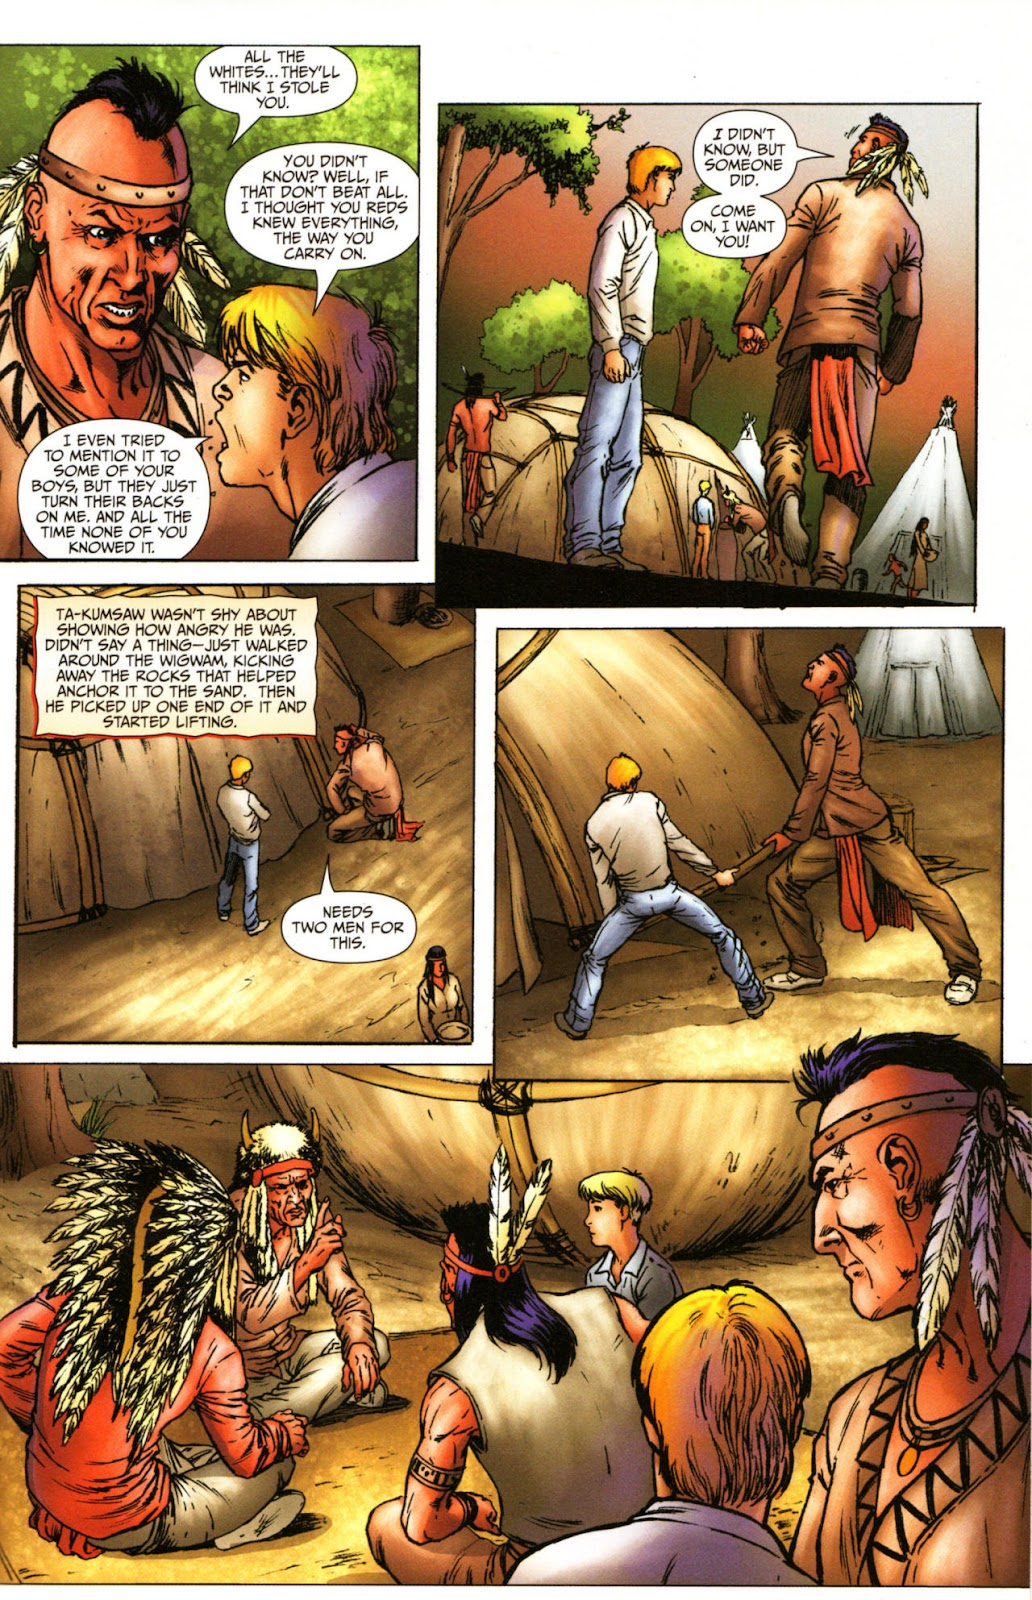 Red Prophet: The Tales of Alvin Maker issue 7 - Page 7